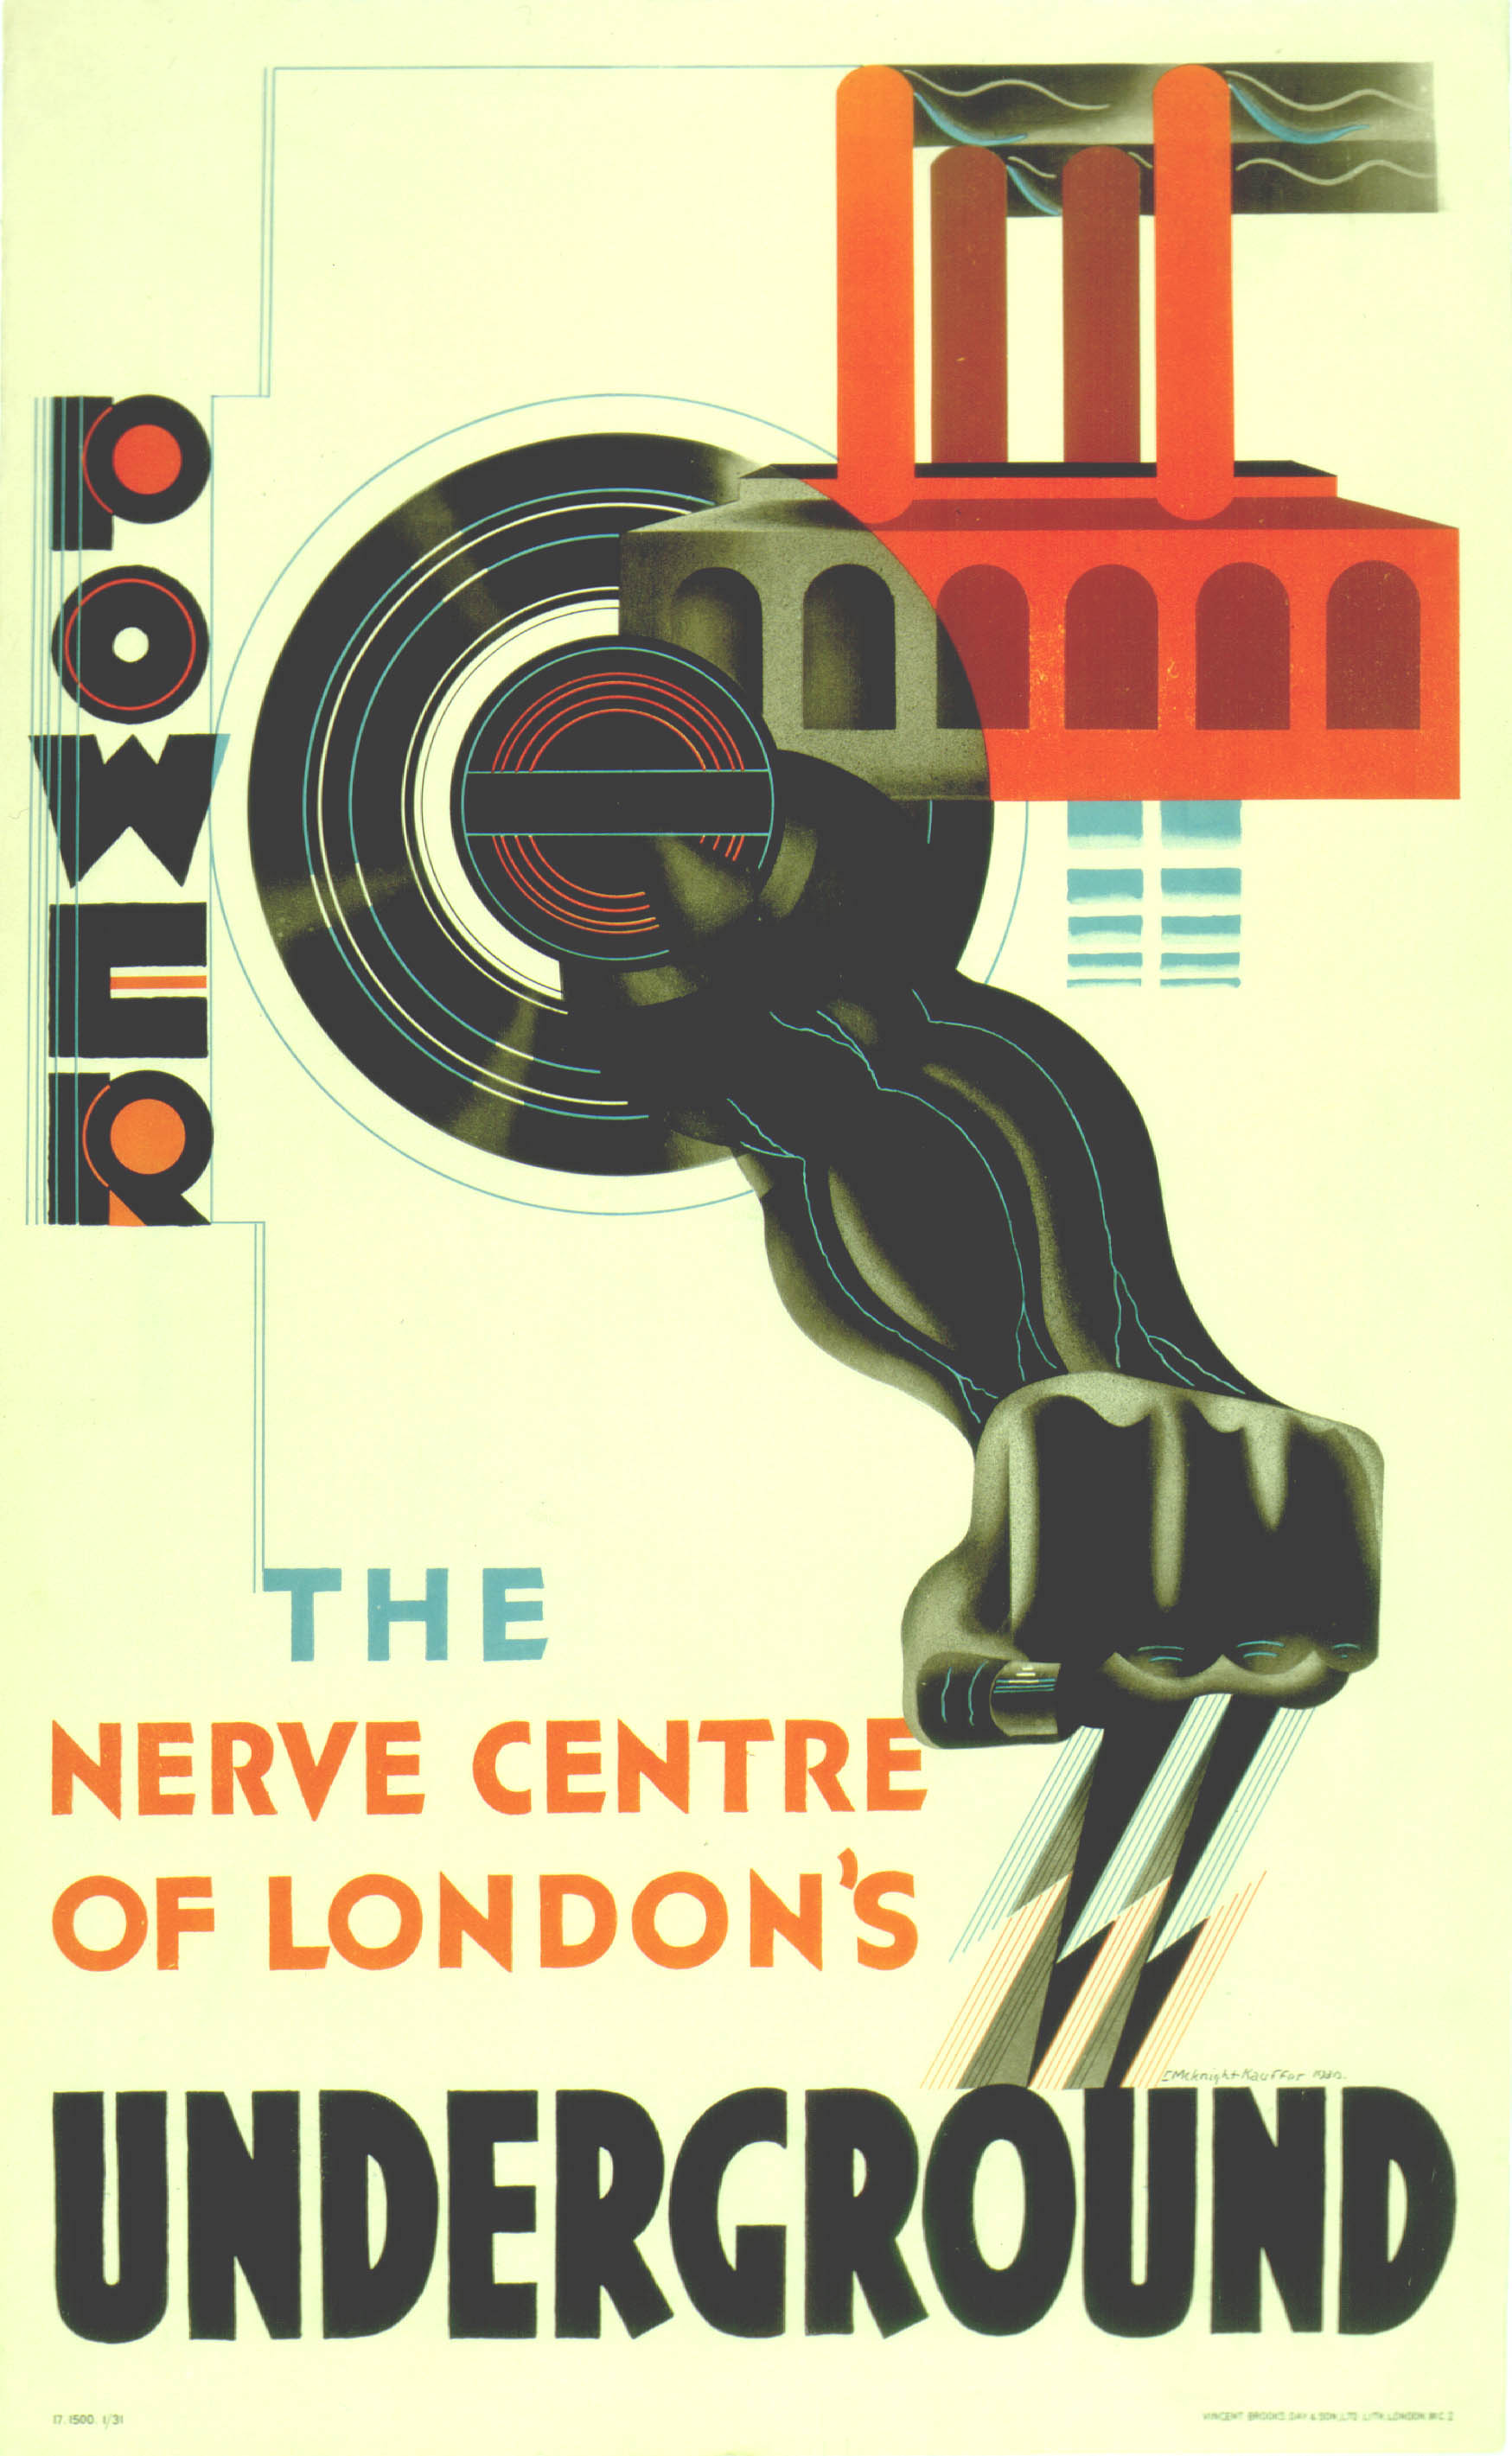 A London Underground poster highlighting the Lots Road Power Station